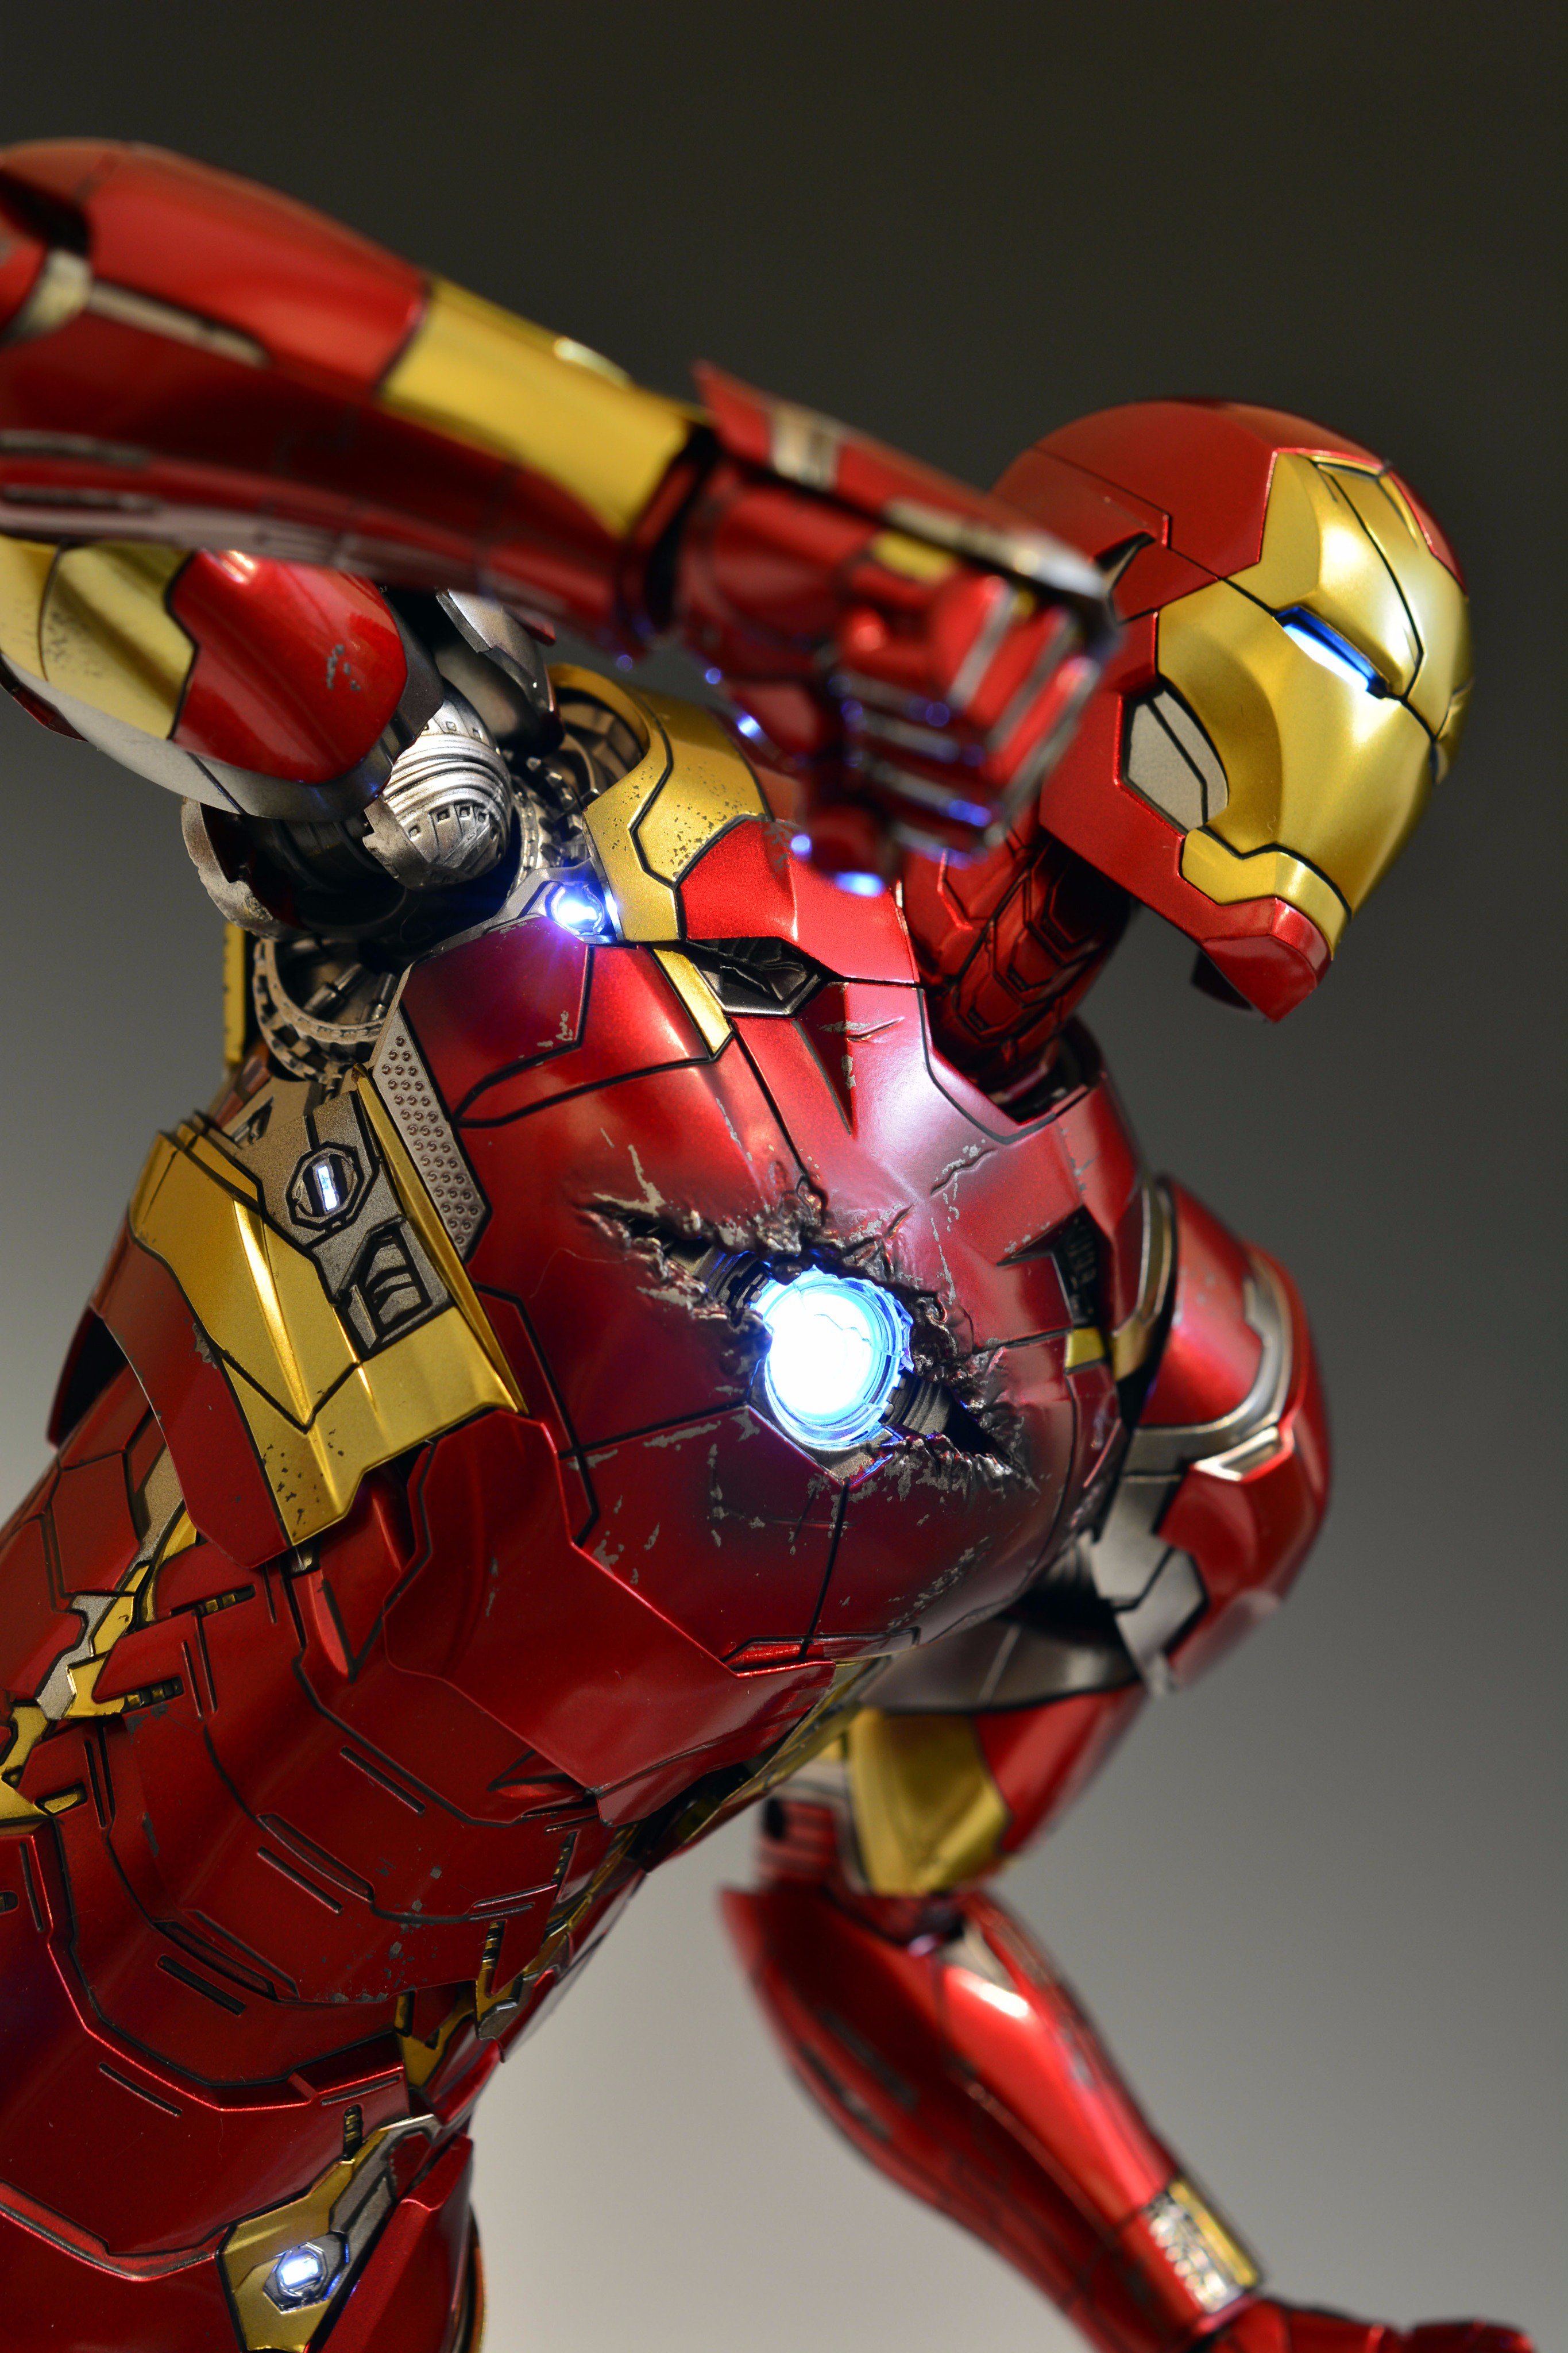 Soul Staiverg on X: "Hottoys Ironman mk46 ホットトイズ アイアン